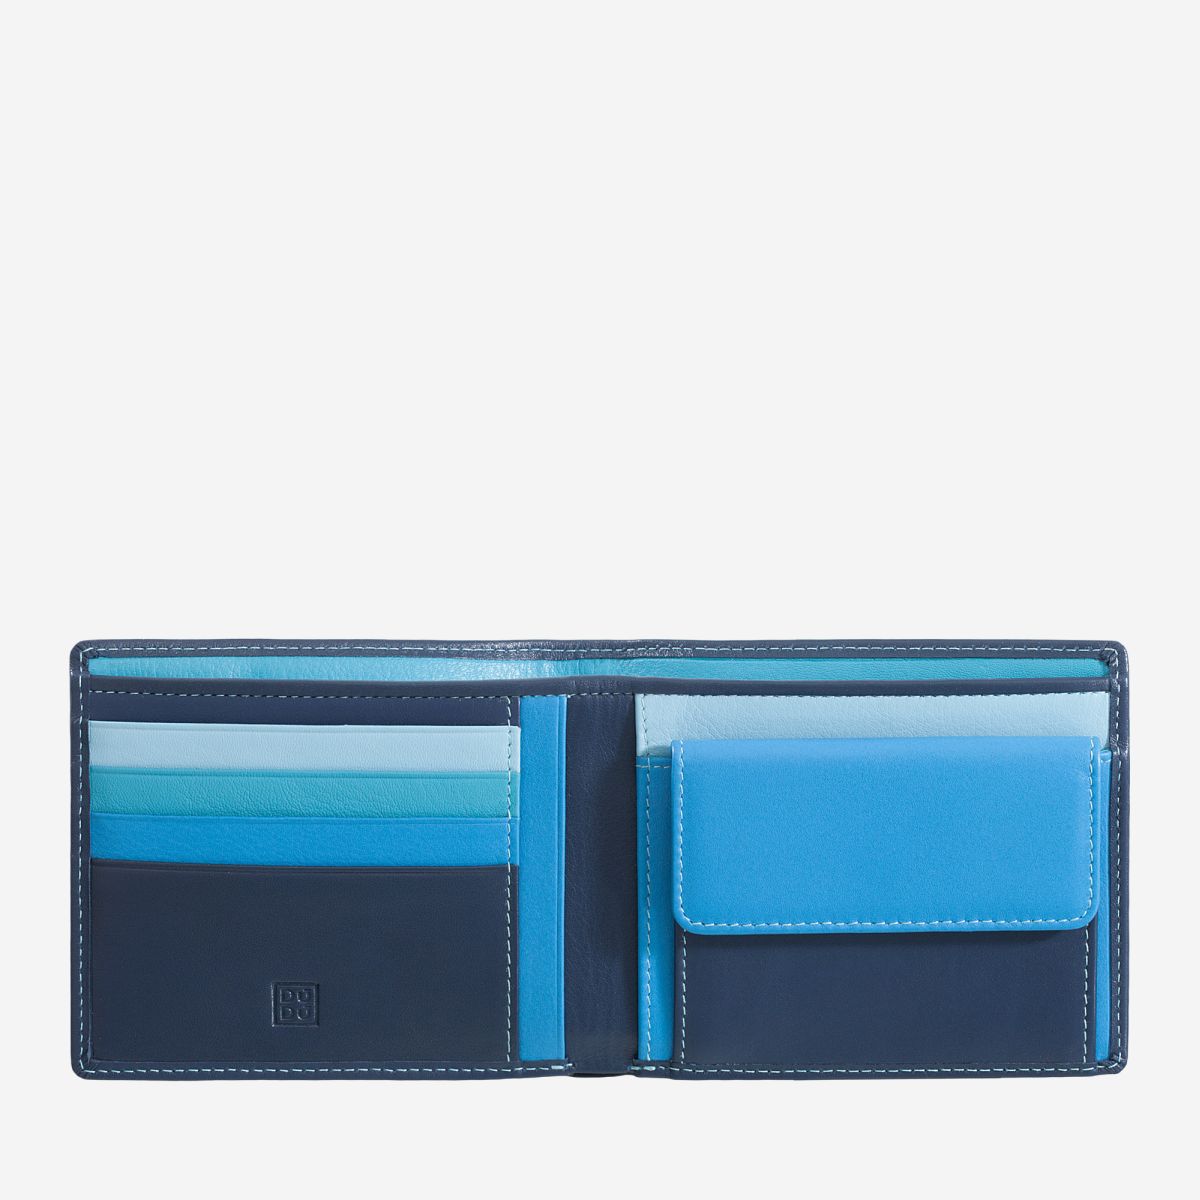 New wallets 2022 , just arrived , latest collection - Wallets Brands